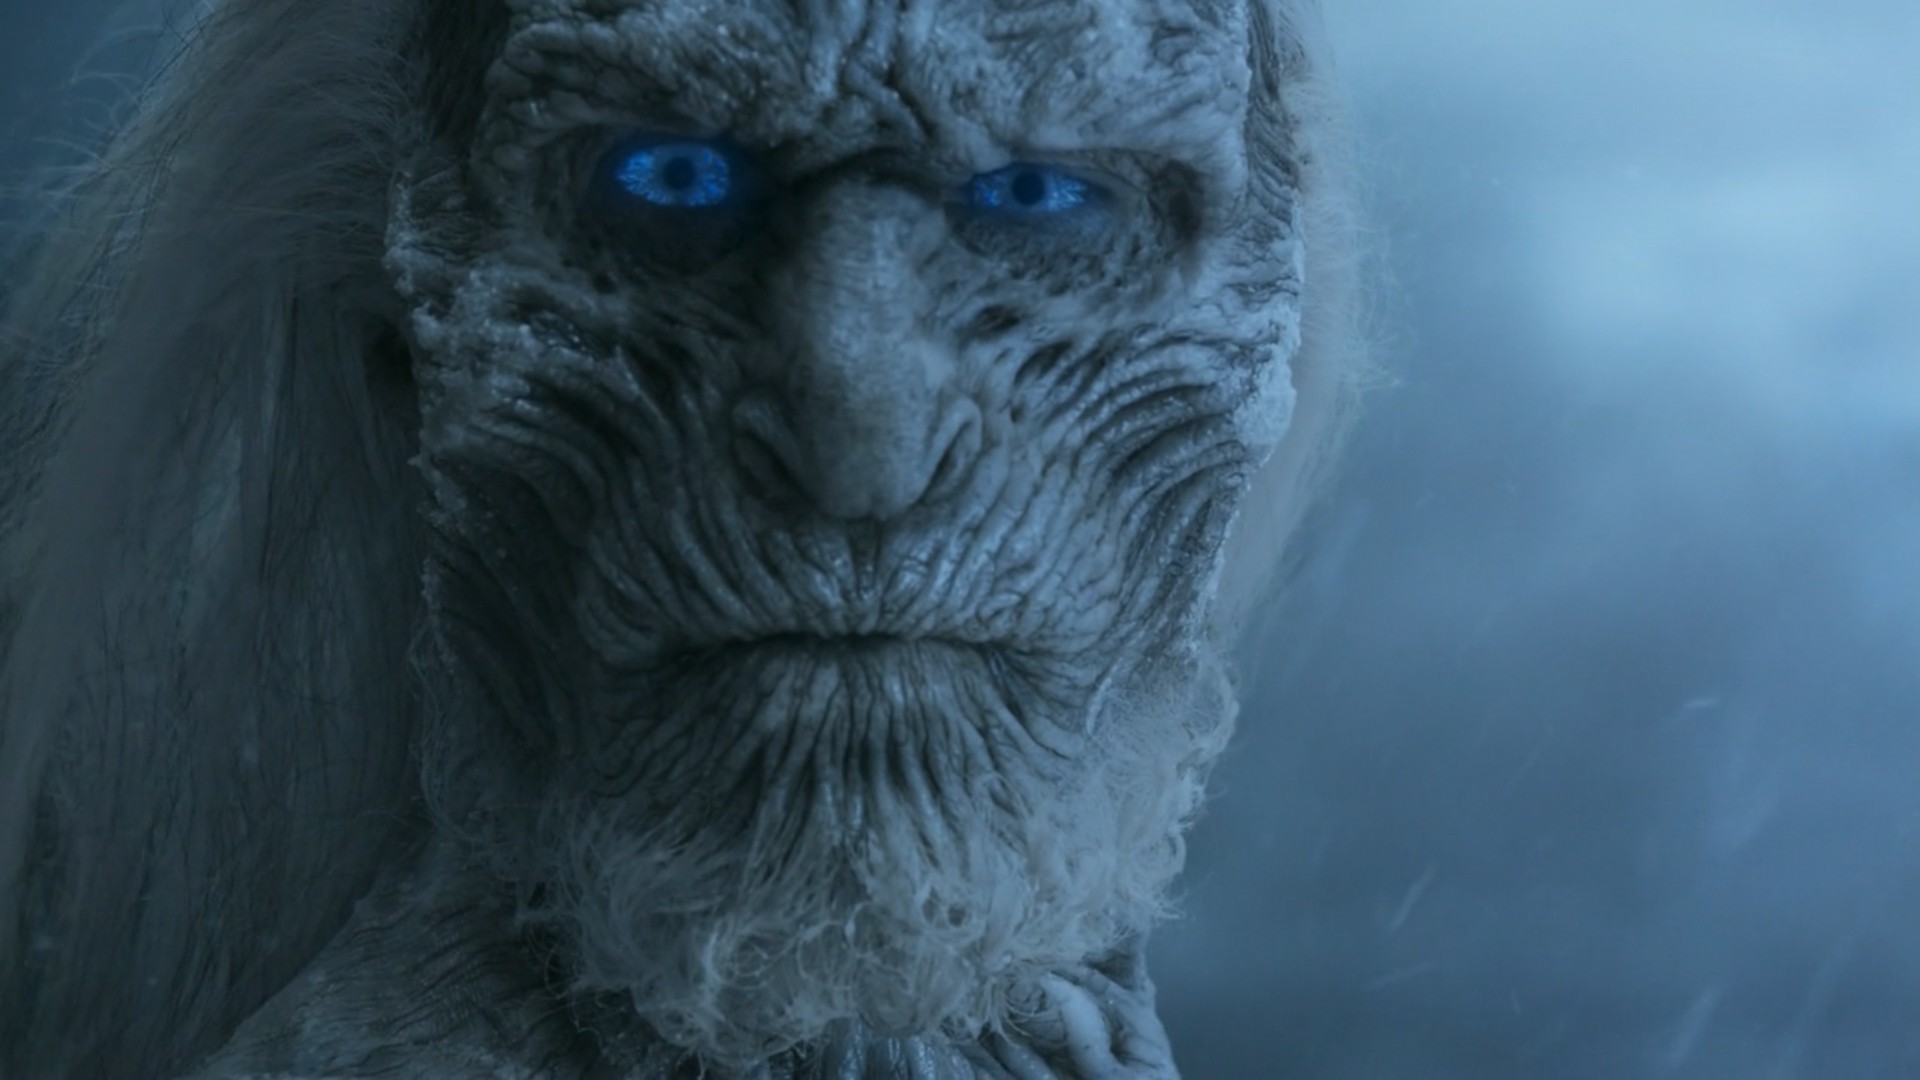 Game Of Thrones, White Walkers Wallpapers HD / Desktop and Mobile